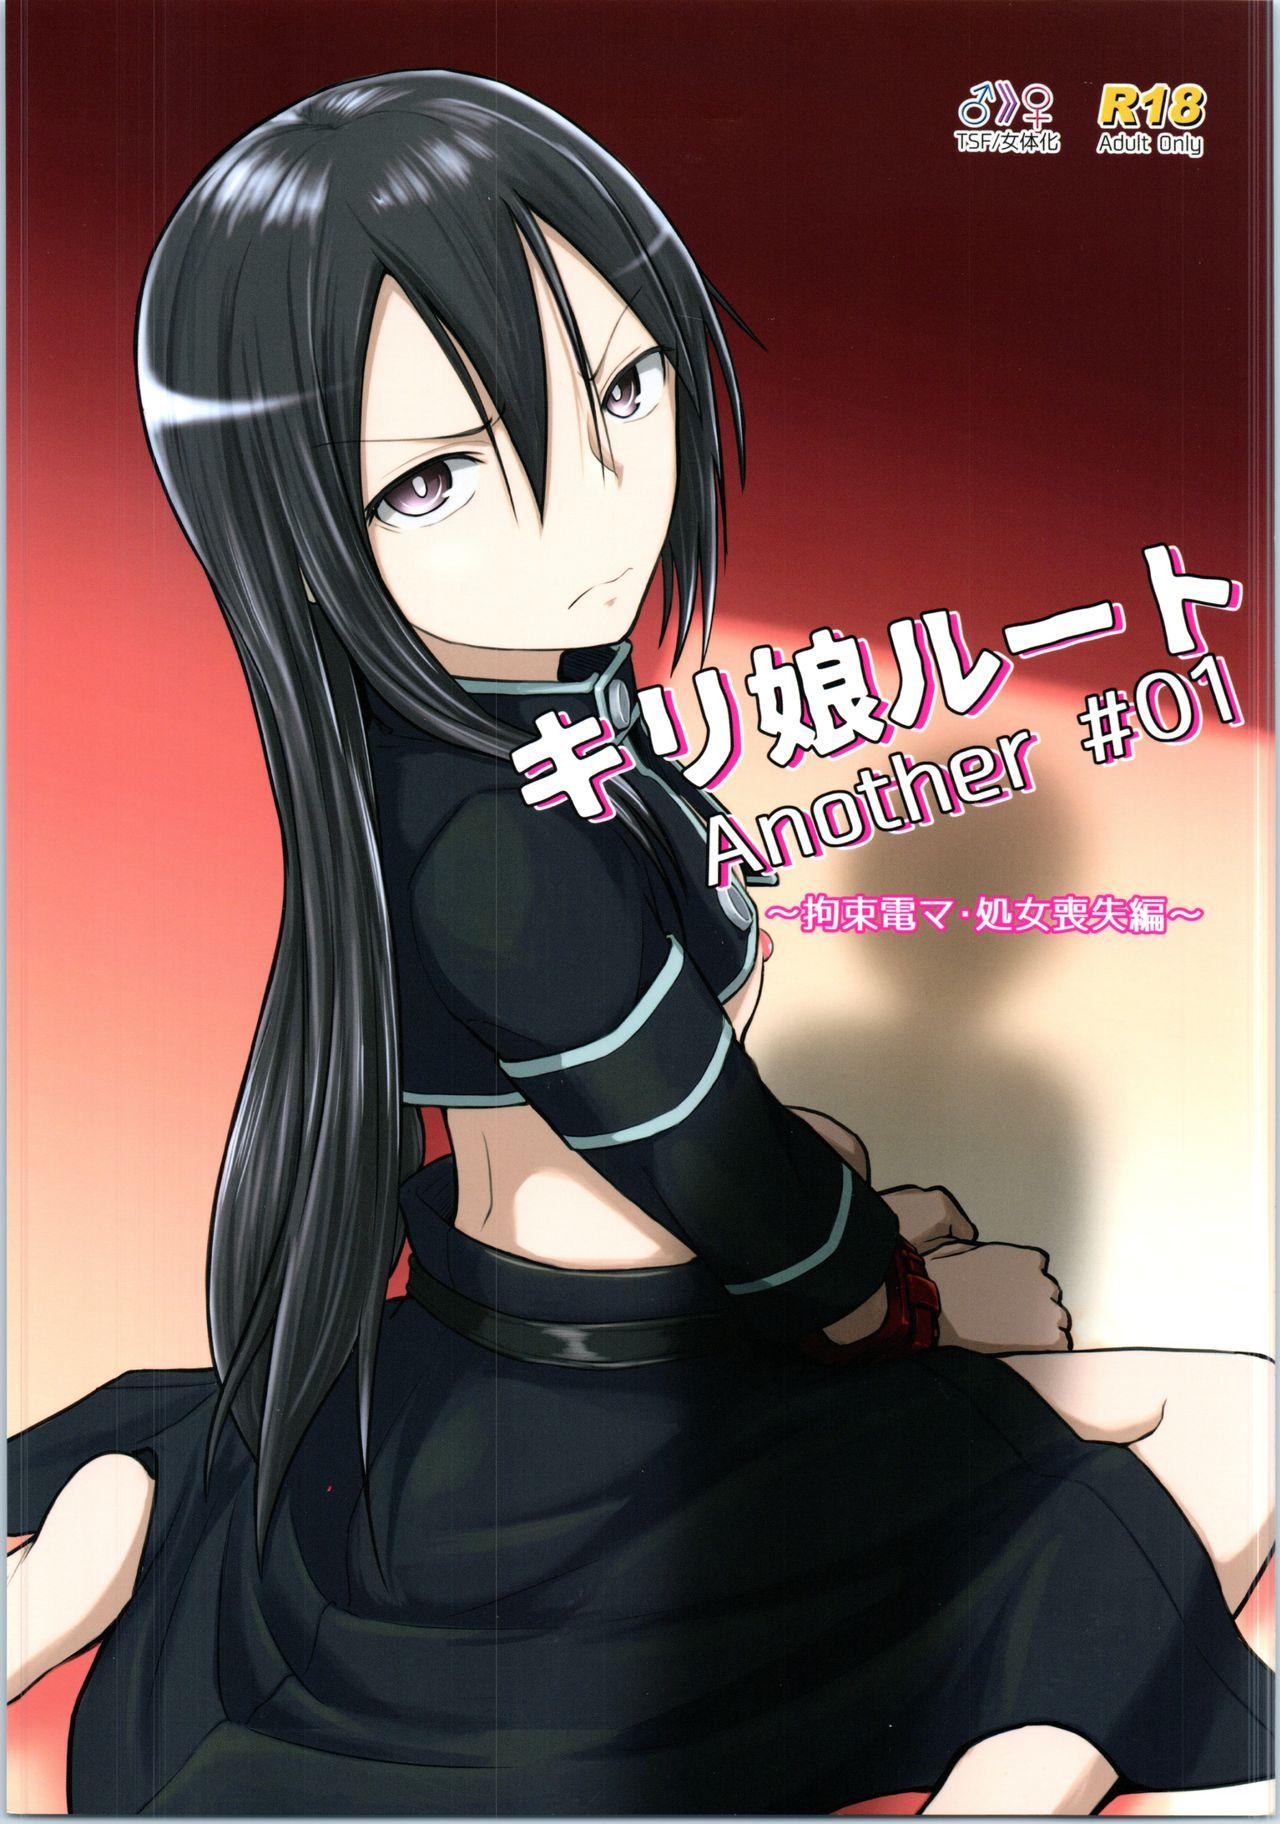 Snatch Another 01 - Sword art online Gay Pawnshop - Picture 1